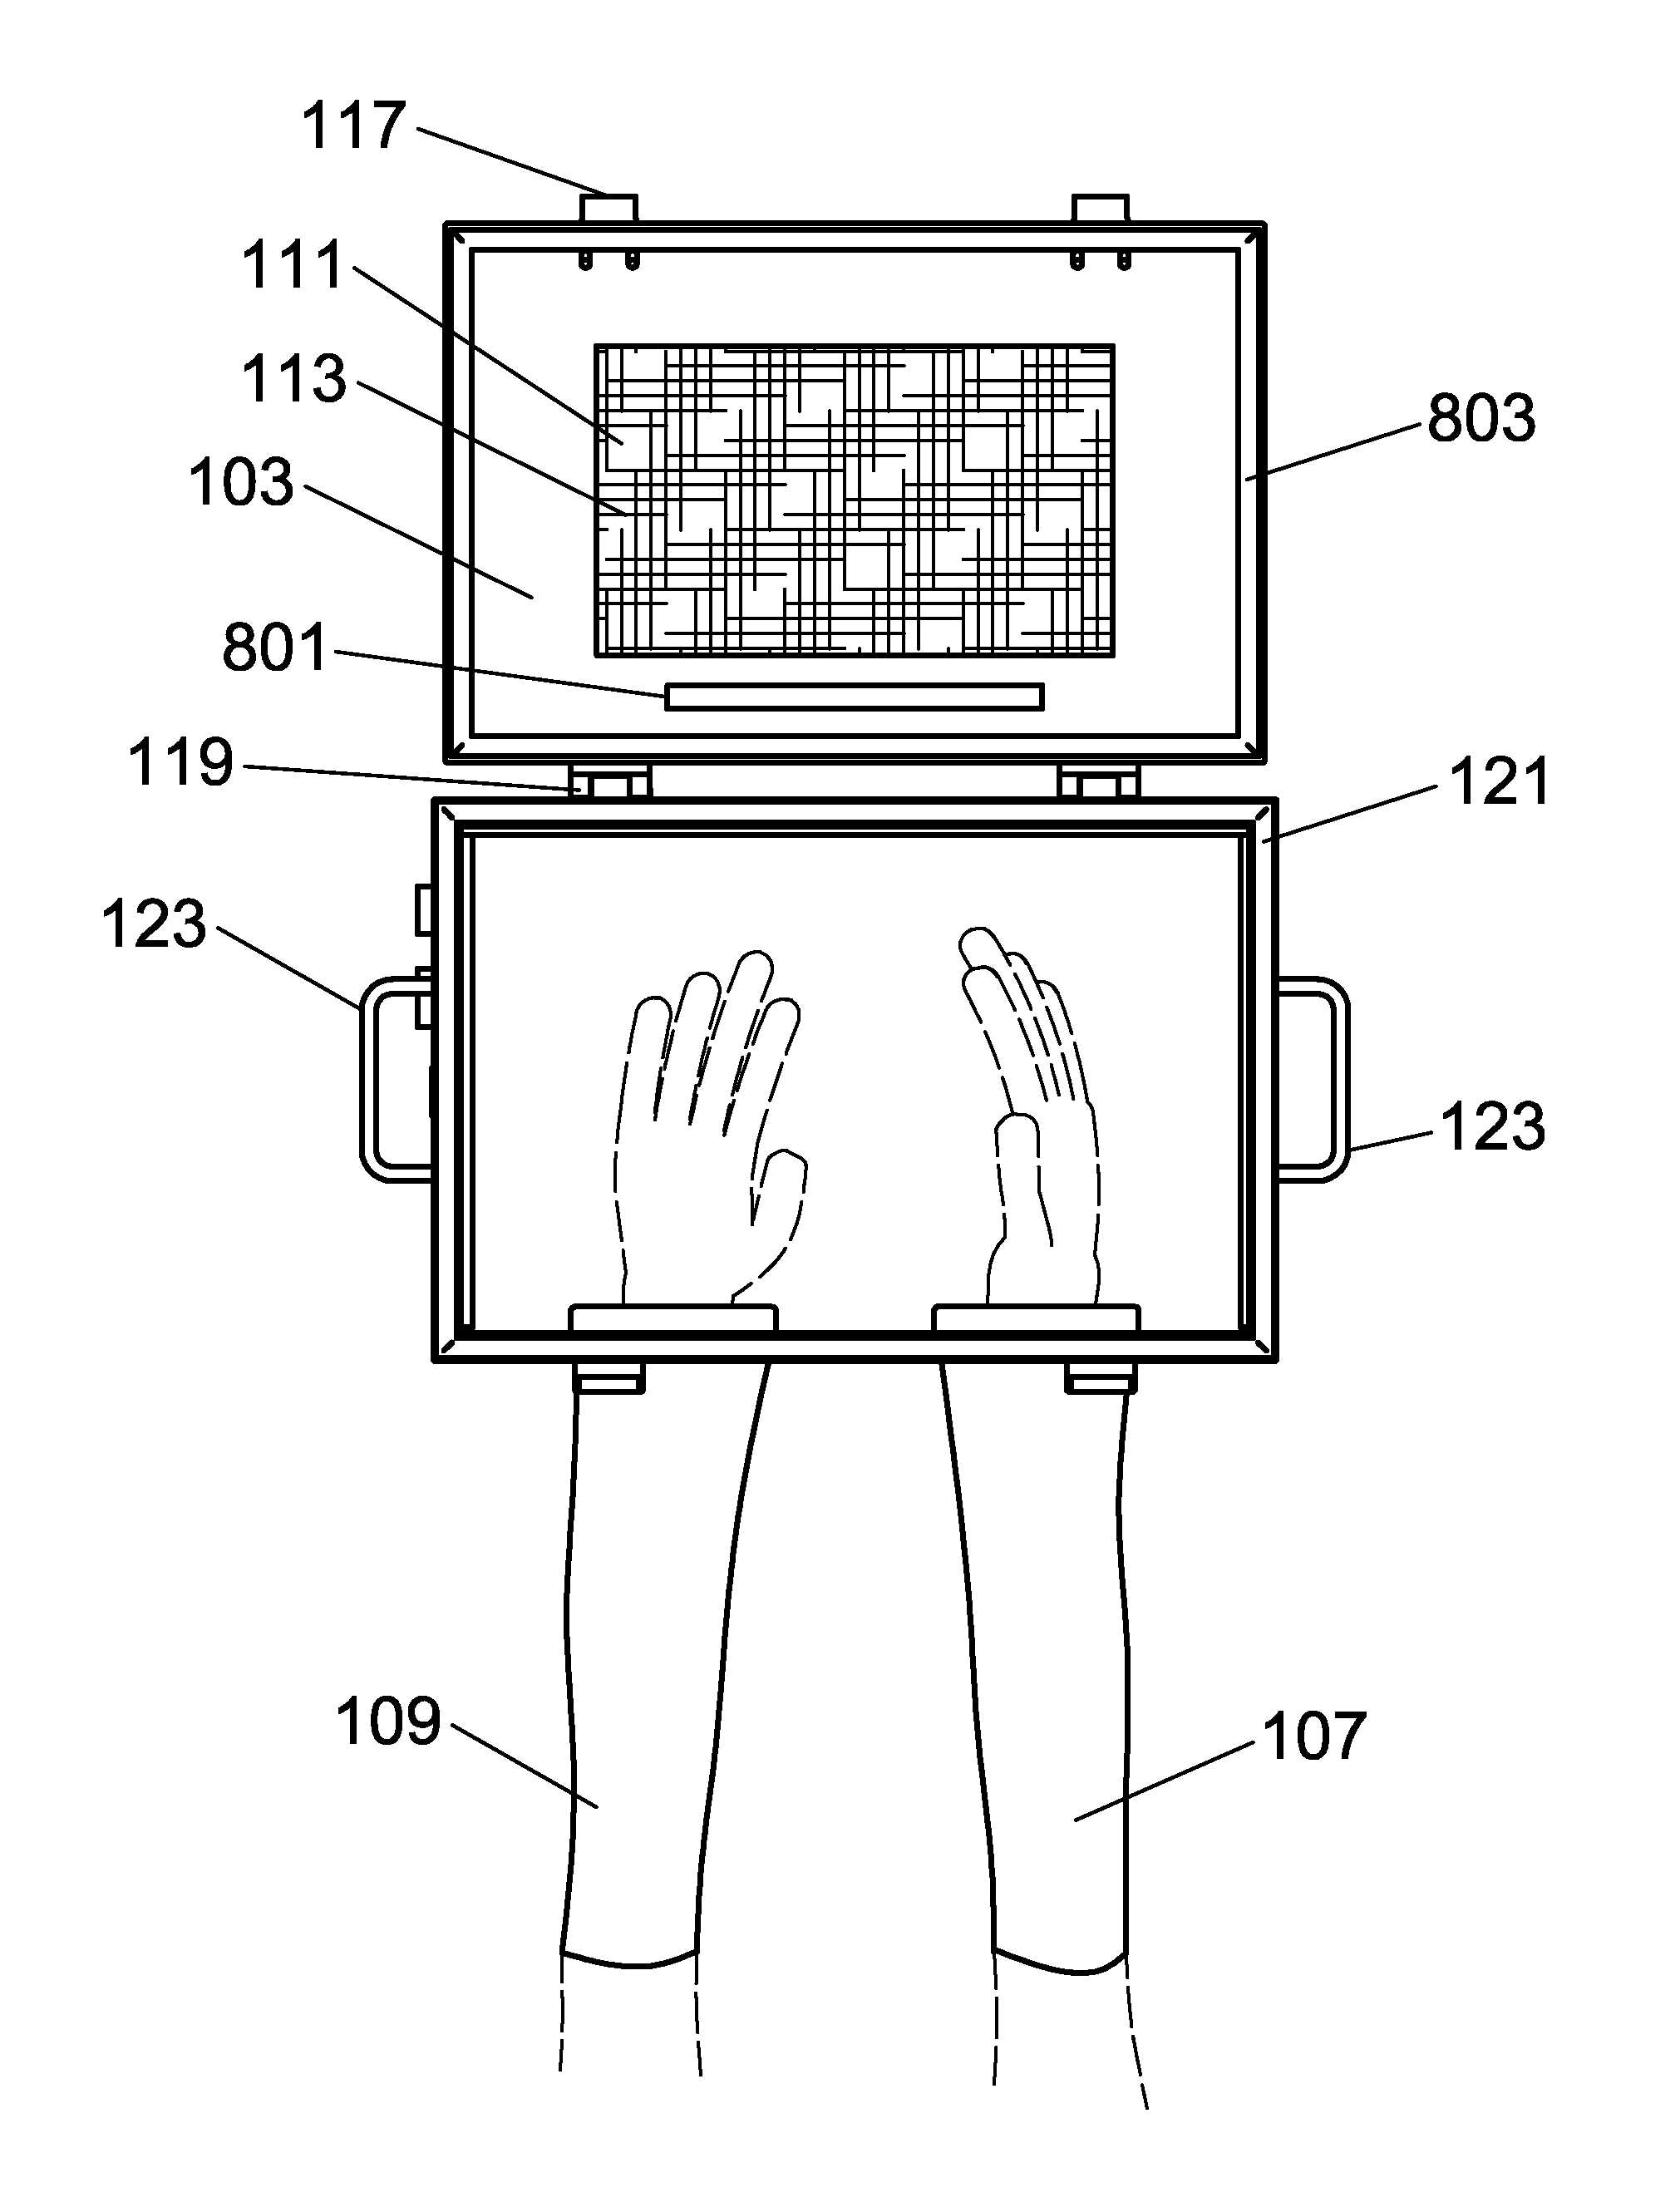 Electromagnetic Isolation Chamber With Unimpeded Hand Entry